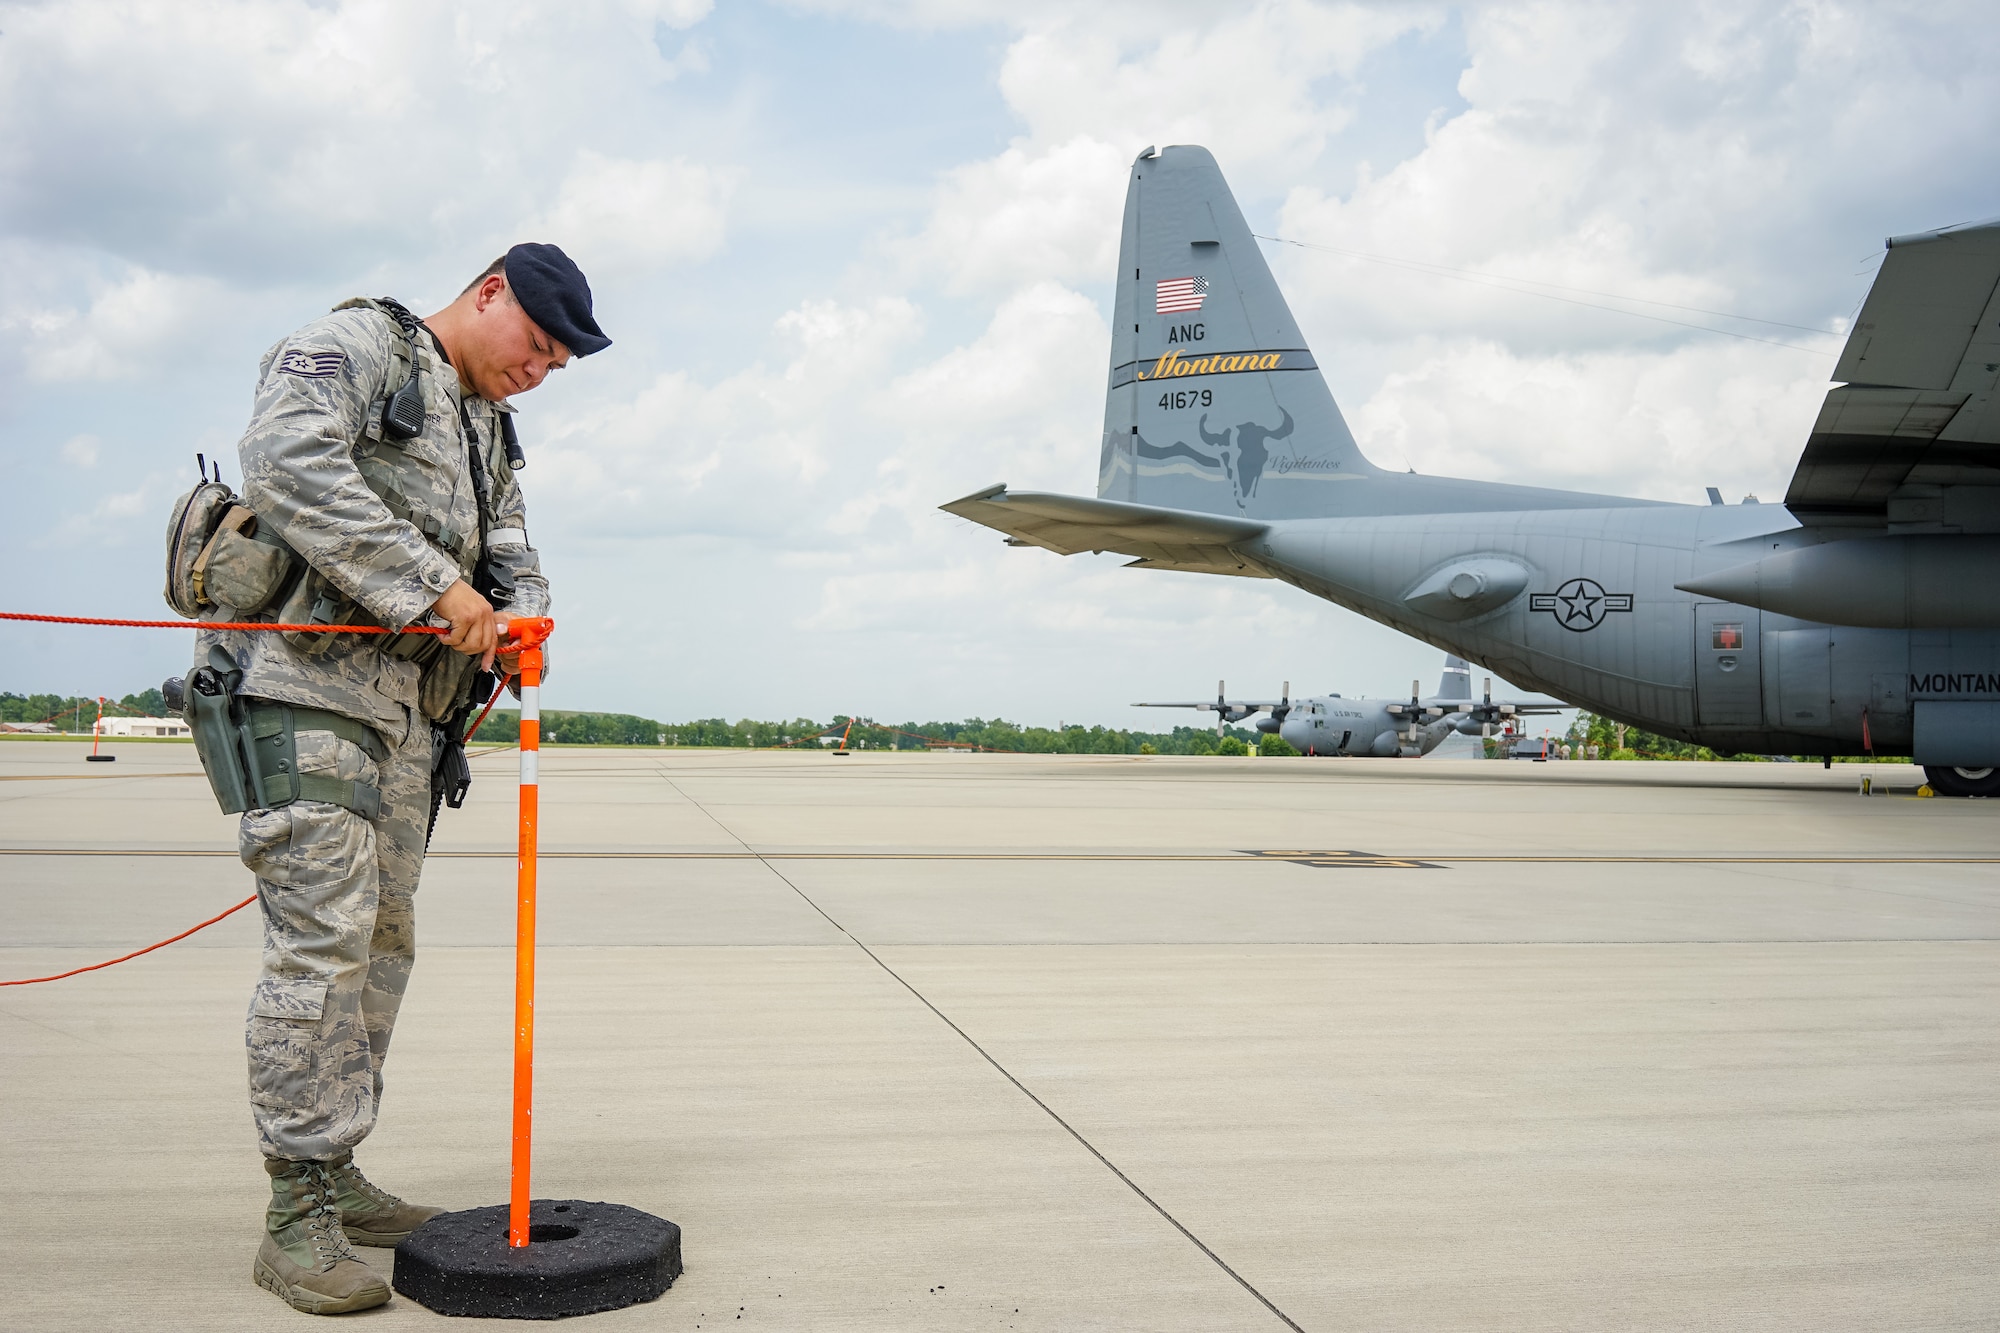 U.S. Air Force Staff Sgt. Hai Spletstoser, 116th Security Forces Squadron, Georgia Air National Guard, ropes off a restricted area around a C-130 Hercules during a training exercise at Joint Base Savannah, Ga., June 25, 2015. The JSTARS cops from the Georgia Air National Guard’s 116th Air Control Wing completed 15 days of law enforcement and flightline security training during their annual tour at Joint Base Savannah. During the training, the security forces Airmen responded to multiple simulated security threats each day and played the role of both cops and aggressors under the watchful eye of evaluators from the unit. (U.S. Air National Guard photo by Senior Master Sgt. Roger Parsons/Released)

